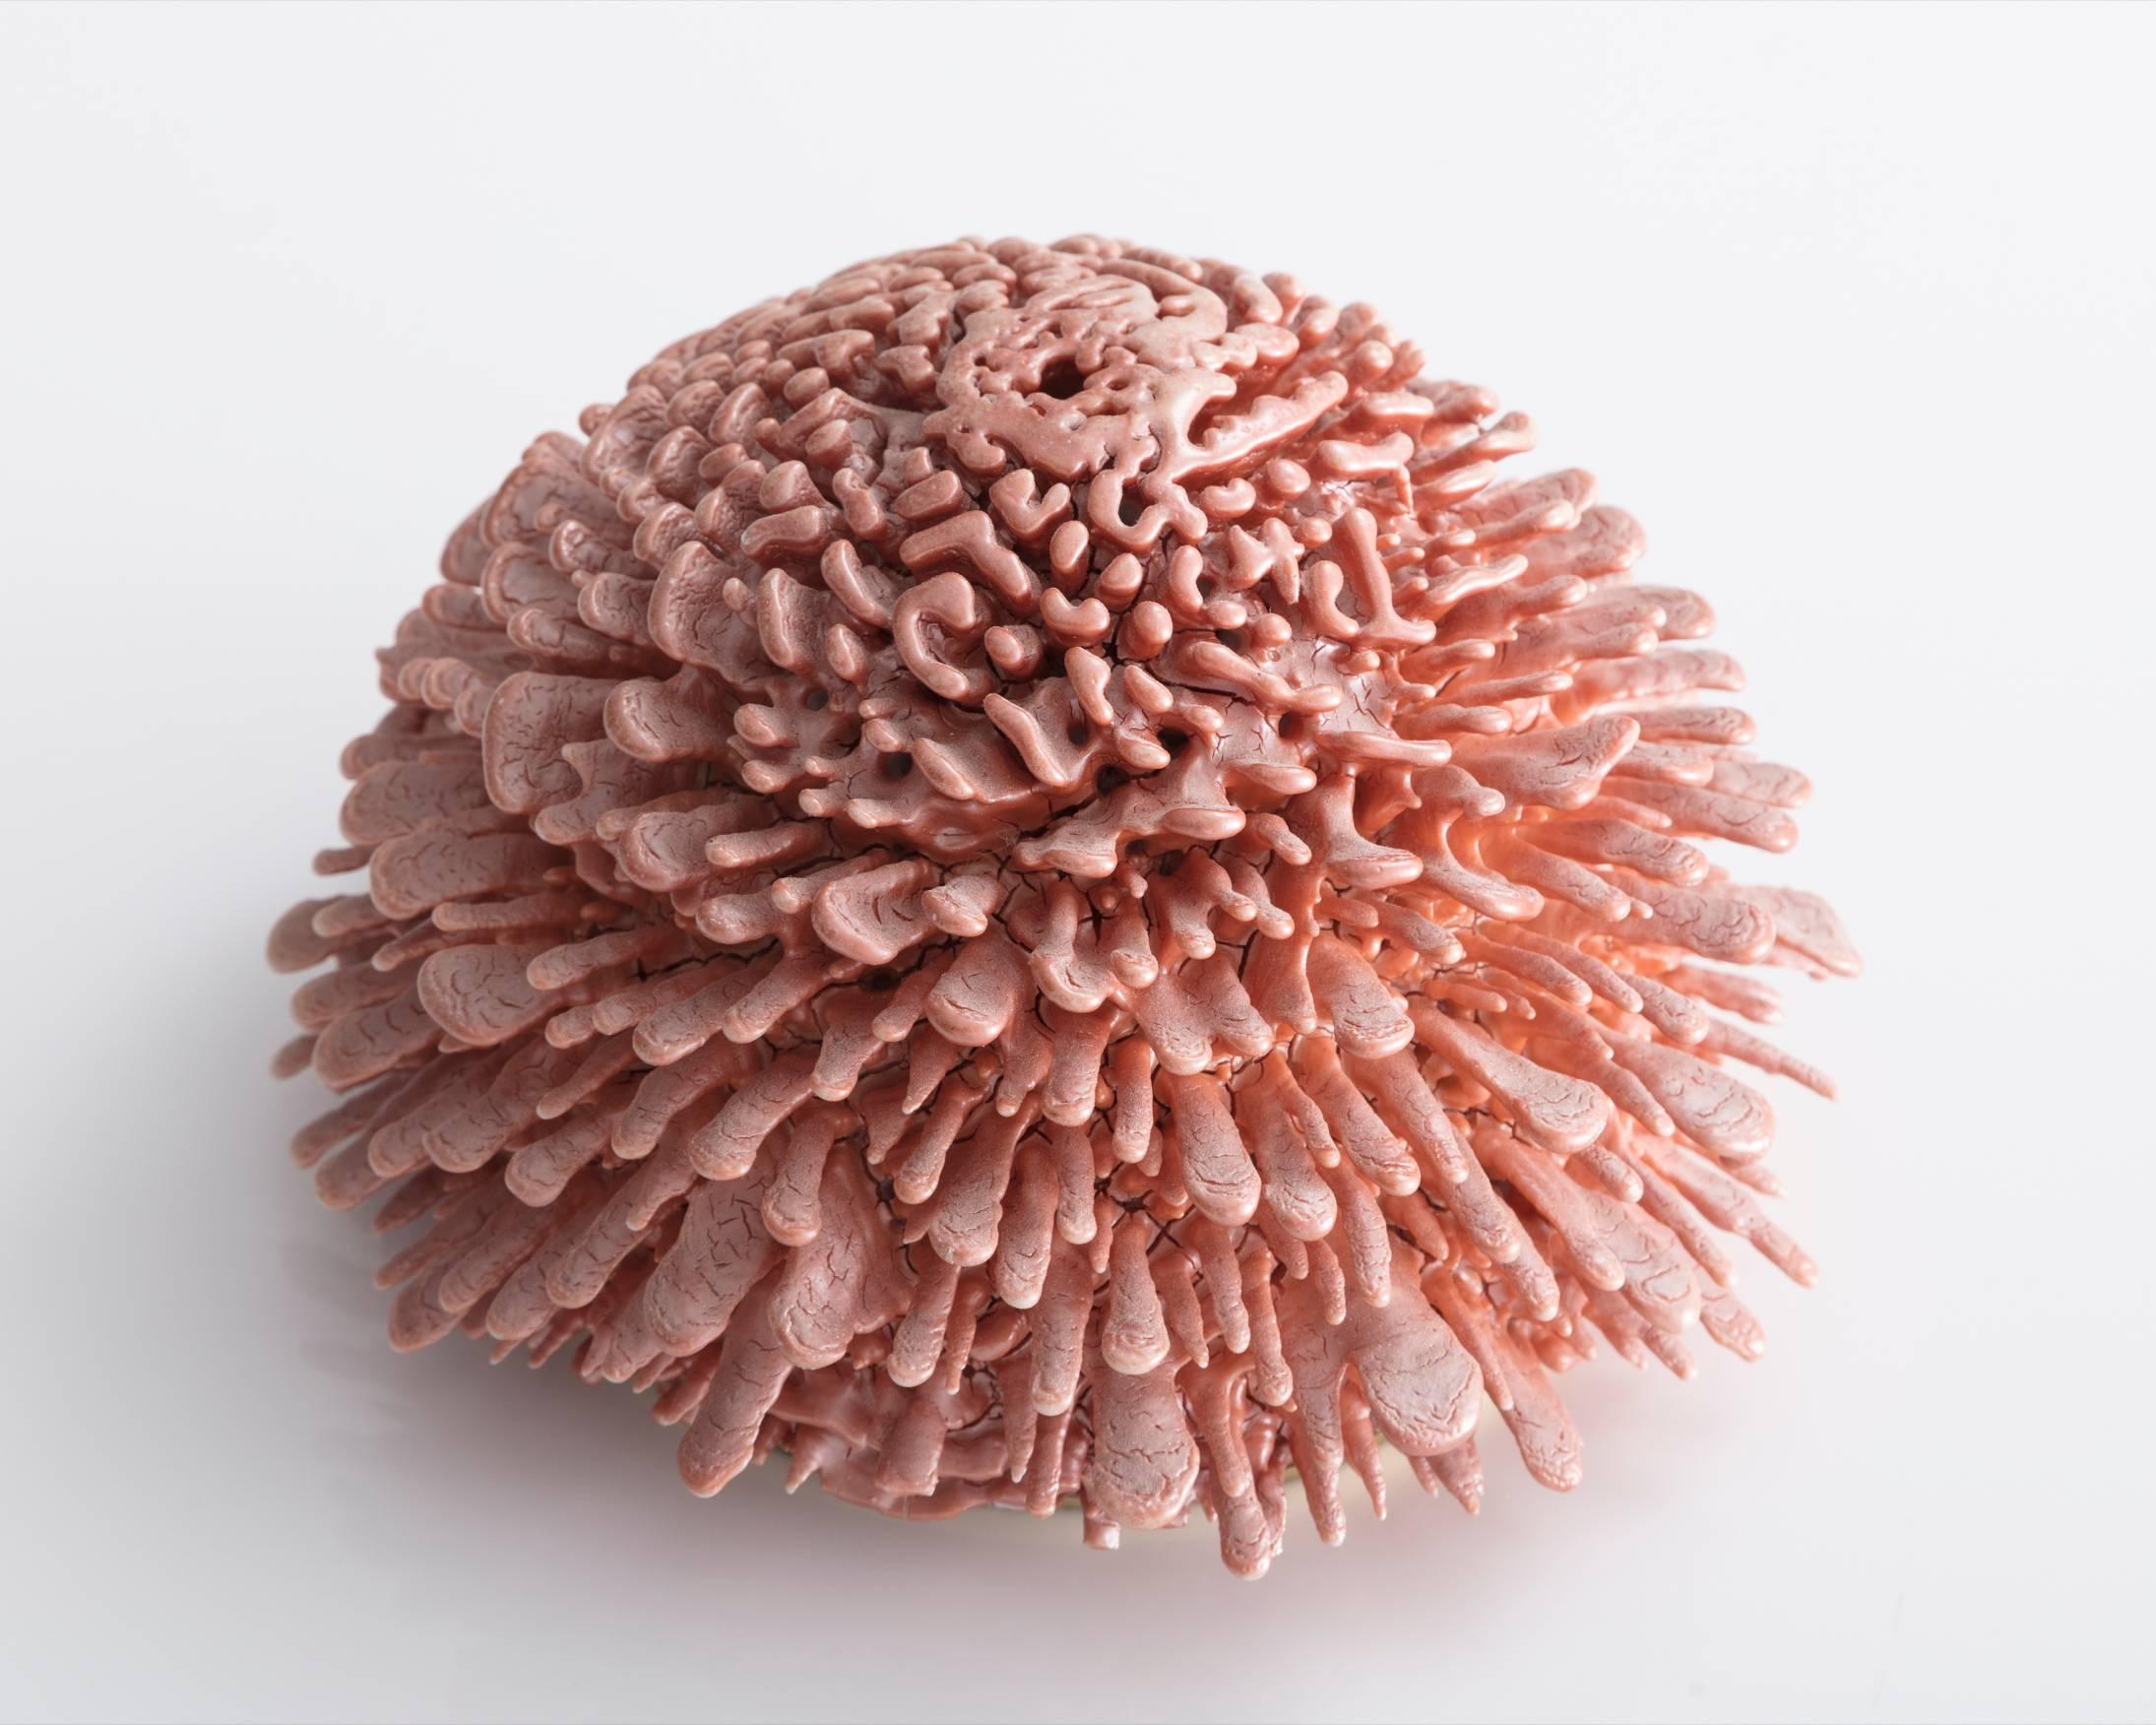 Unique, hand-thrown Urchin with soda ash glaze accretion. Designed and made by The Haas Brothers, USA, 2017.